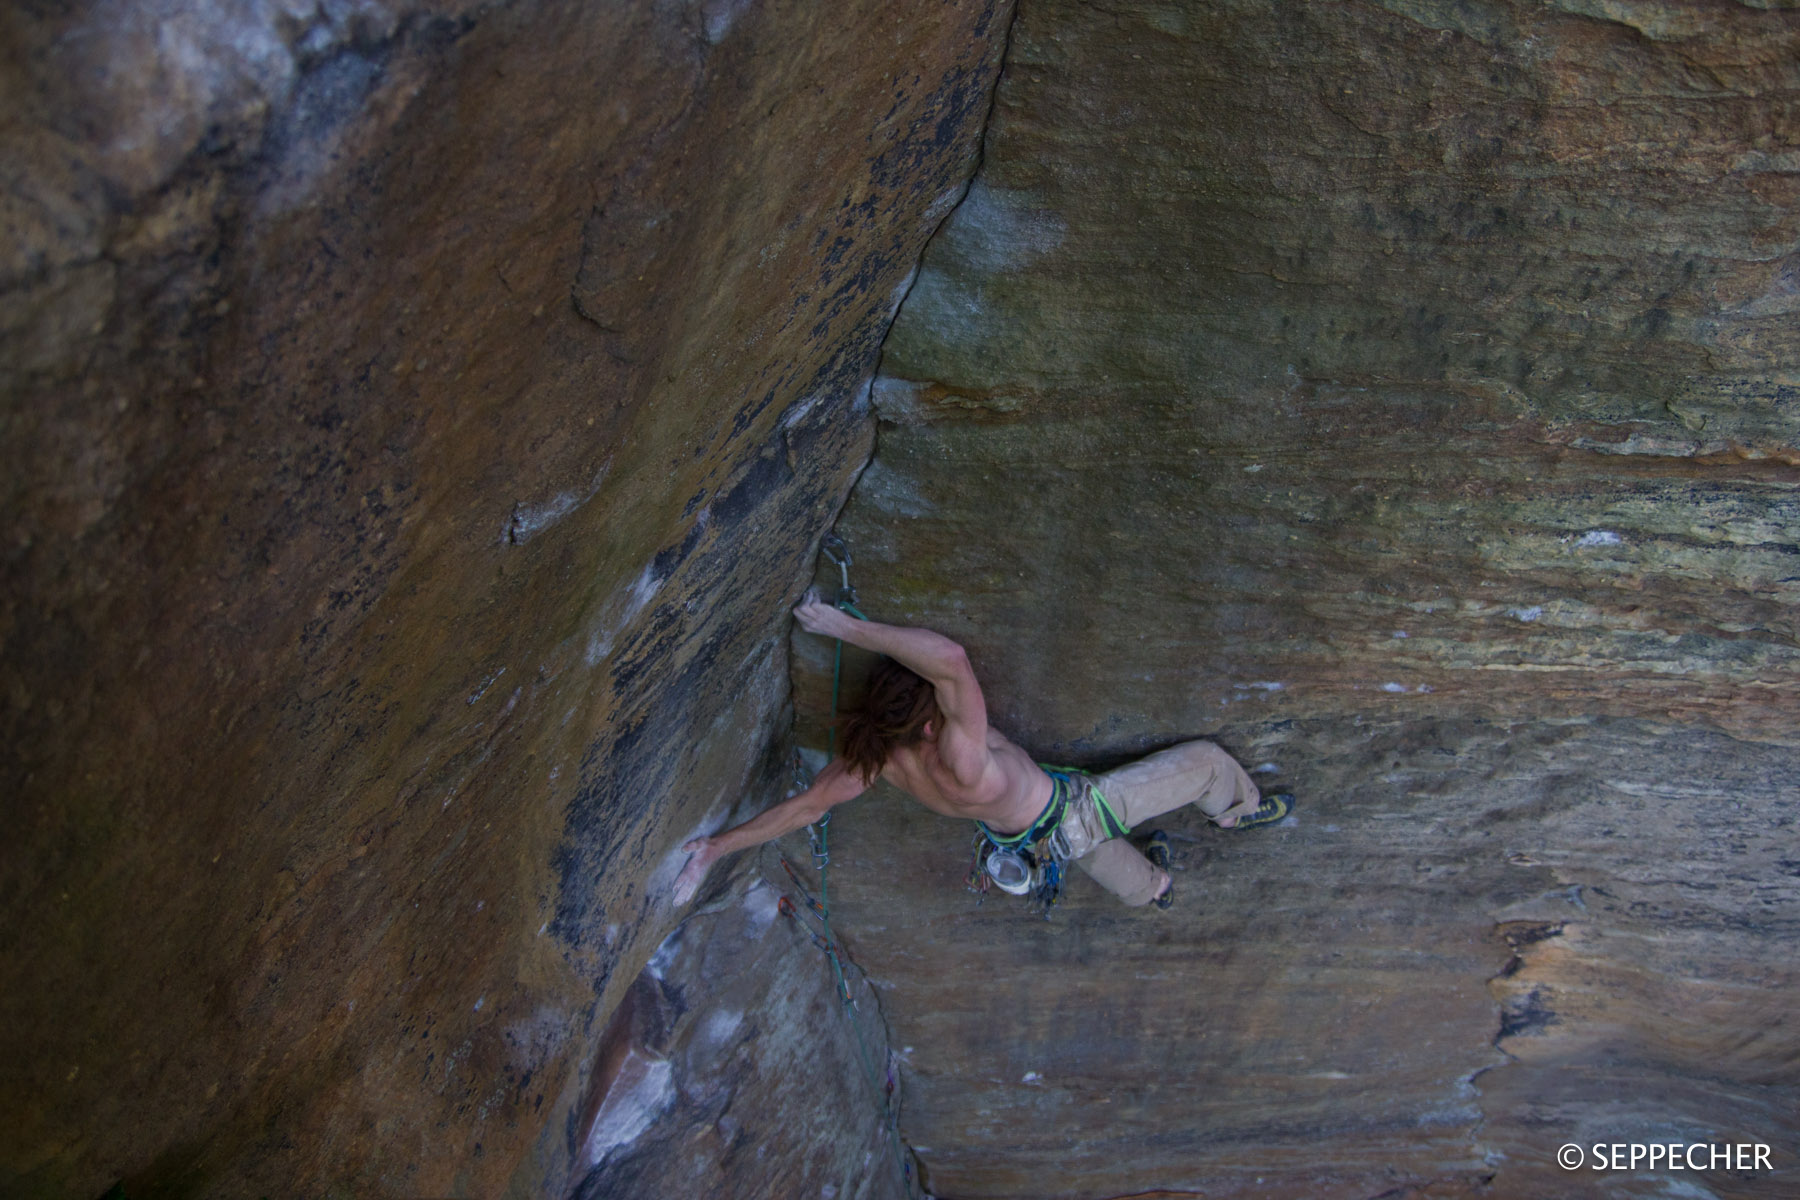 Adrew in the FA of the hardest trad in the red 5.14-.